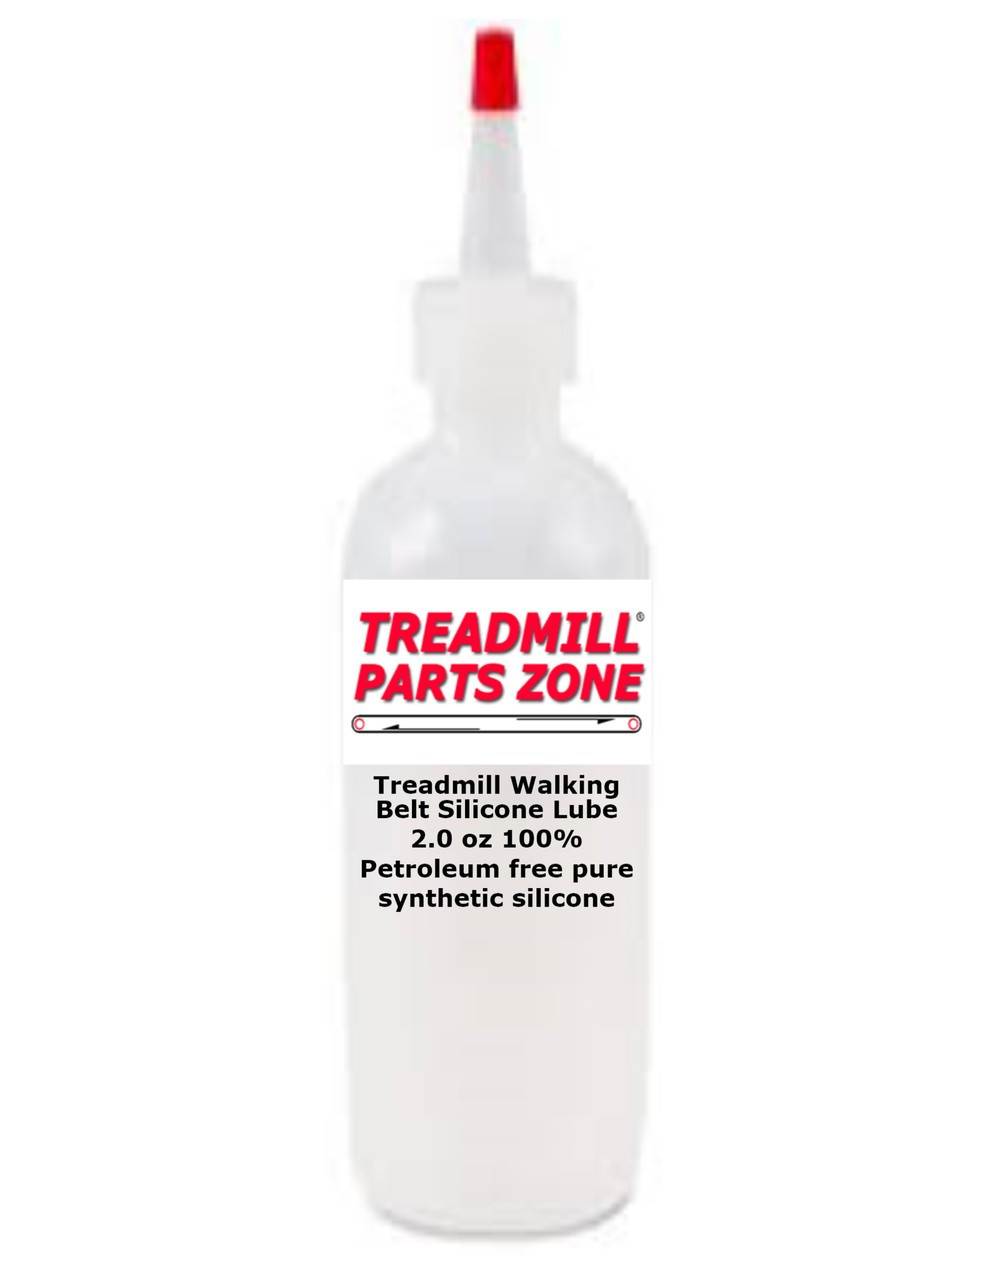 Treadmill Maintenance Silicone Kit With Foam Application Stick